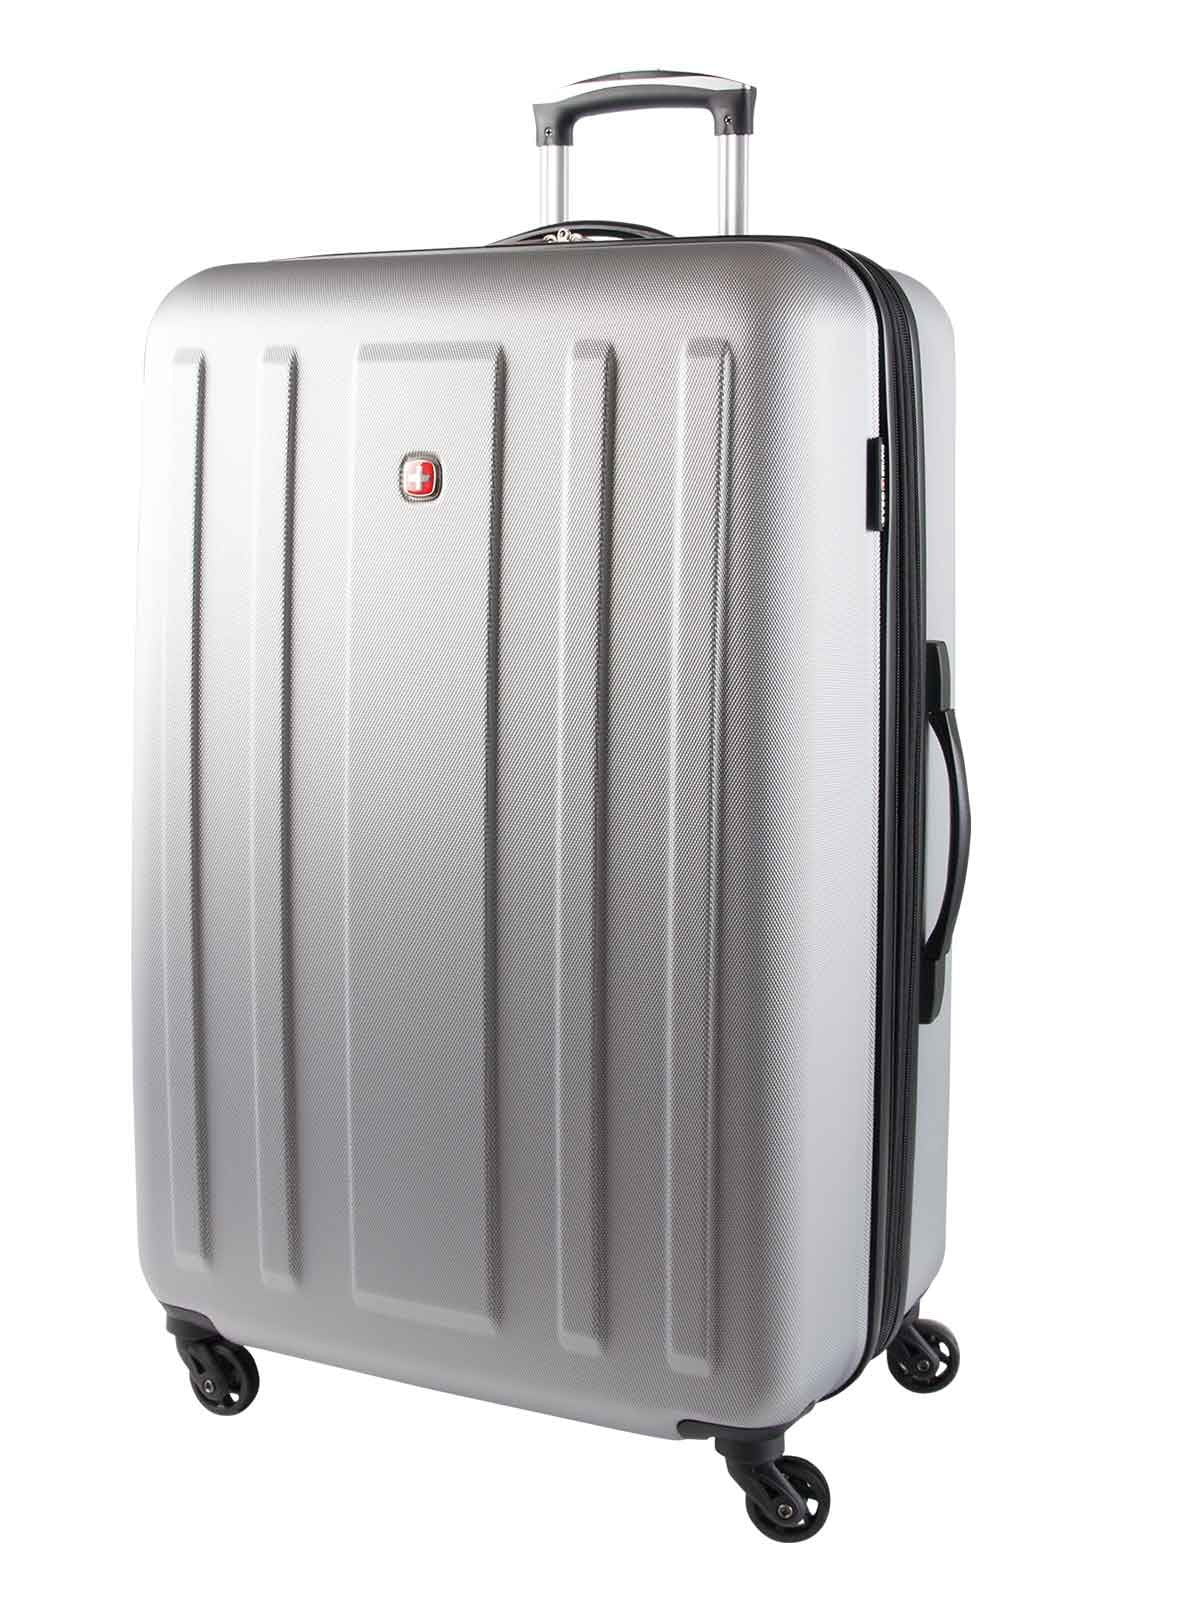 Swiss Gear ABS La Sarinne Lite 28 Inch Moulded Hardside Expandable Spinner Luggage - Silver